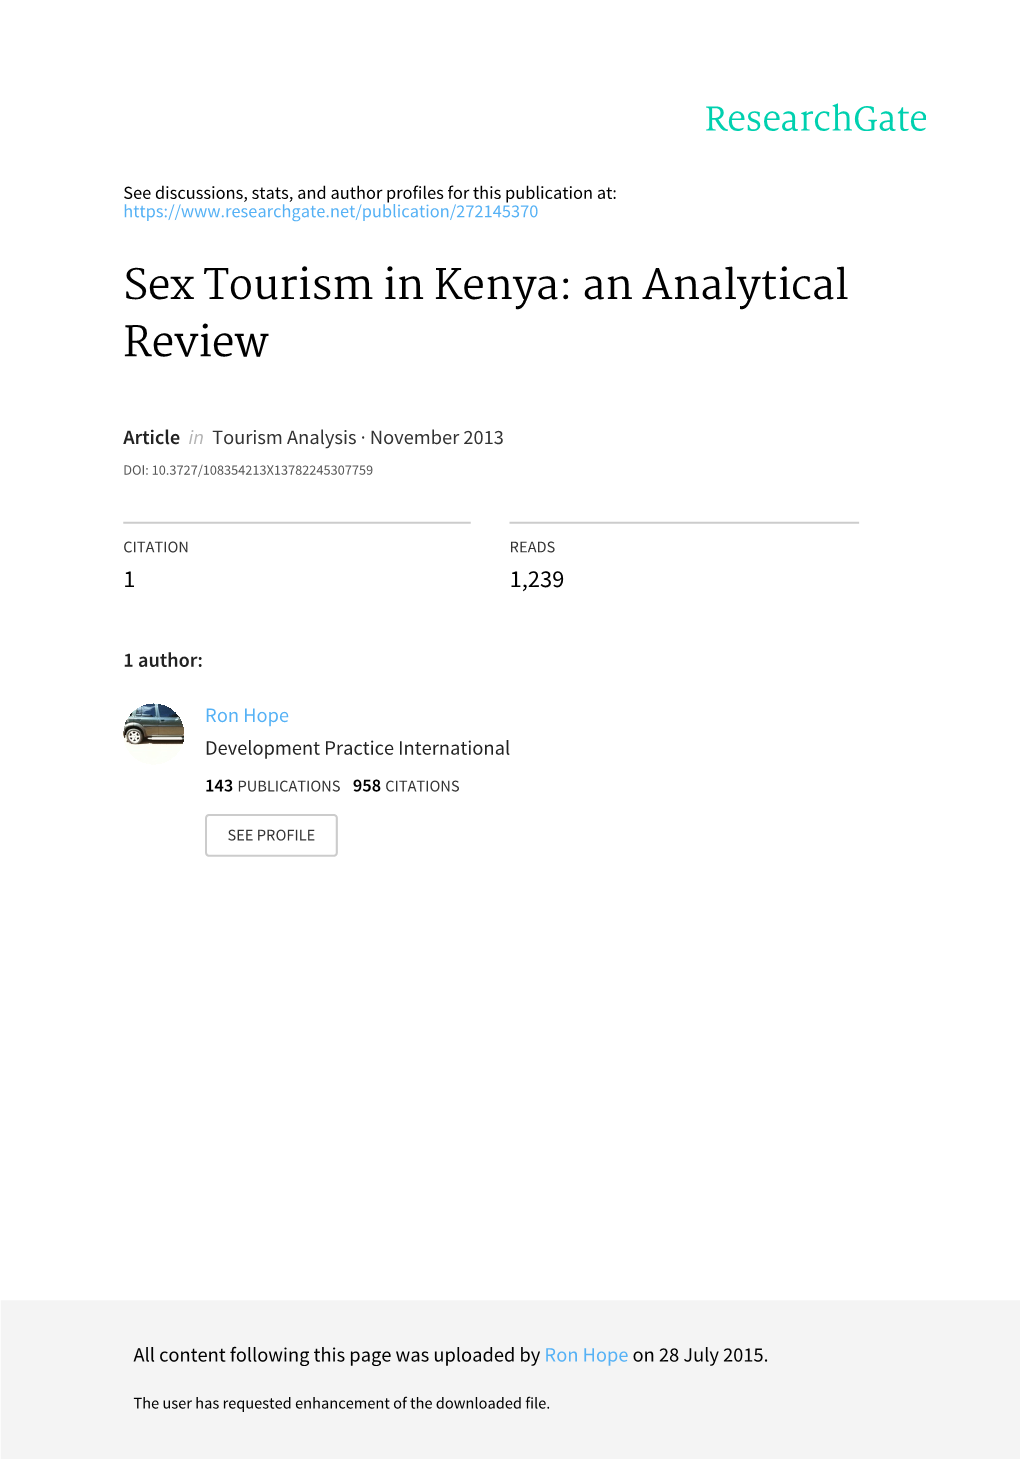 Sex Tourism in Kenya: an Analytical Review